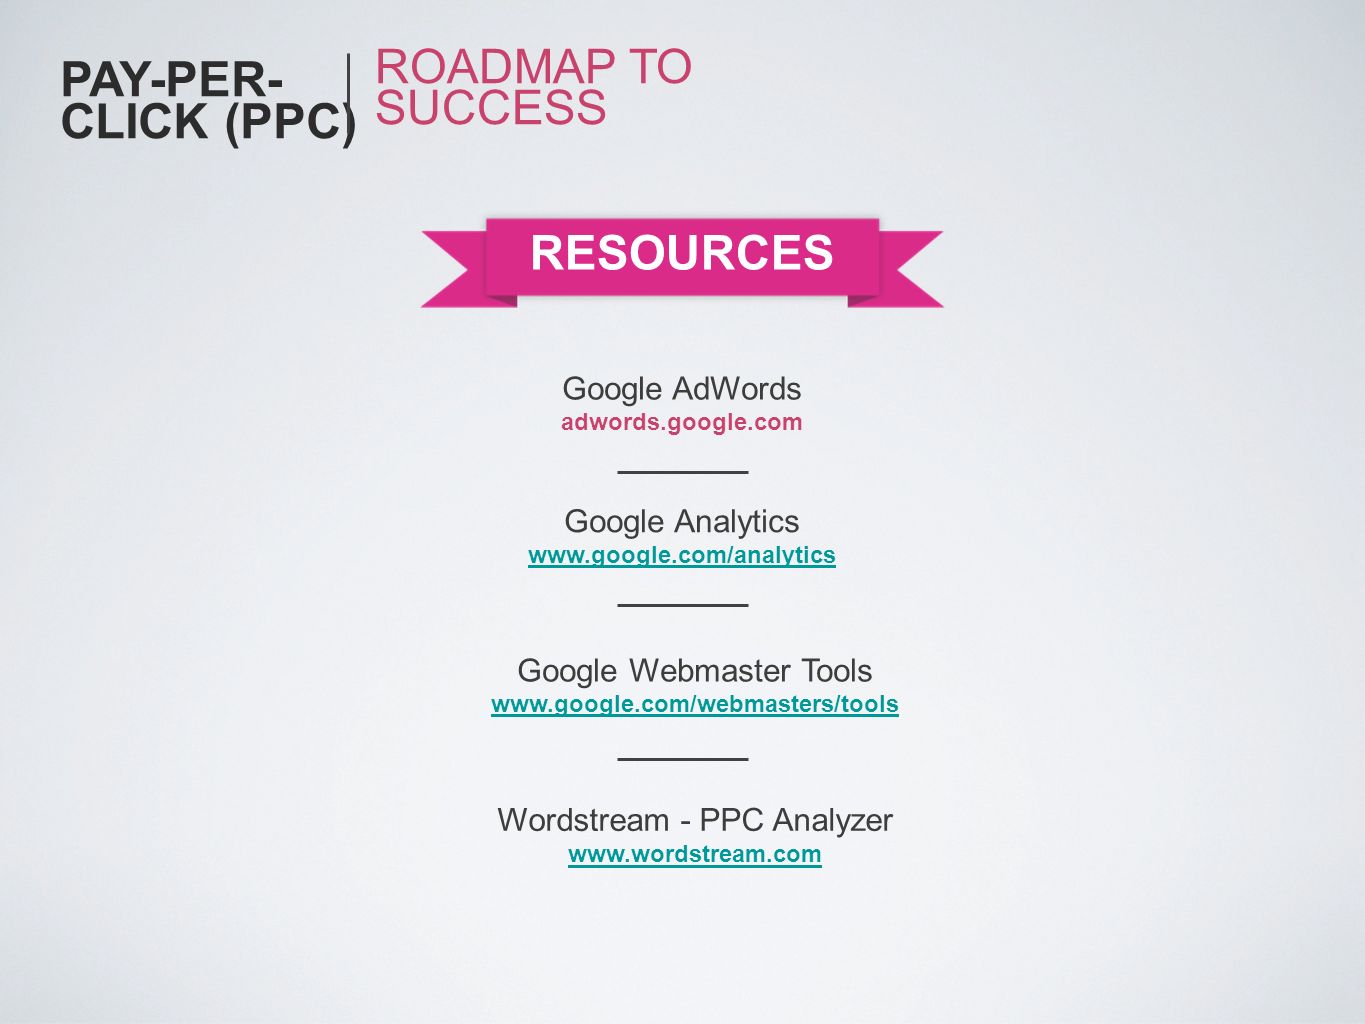 PAY-PER-CLICK (PPC) ROADMAP TO SUCCESS RESOURCES Google AdWords